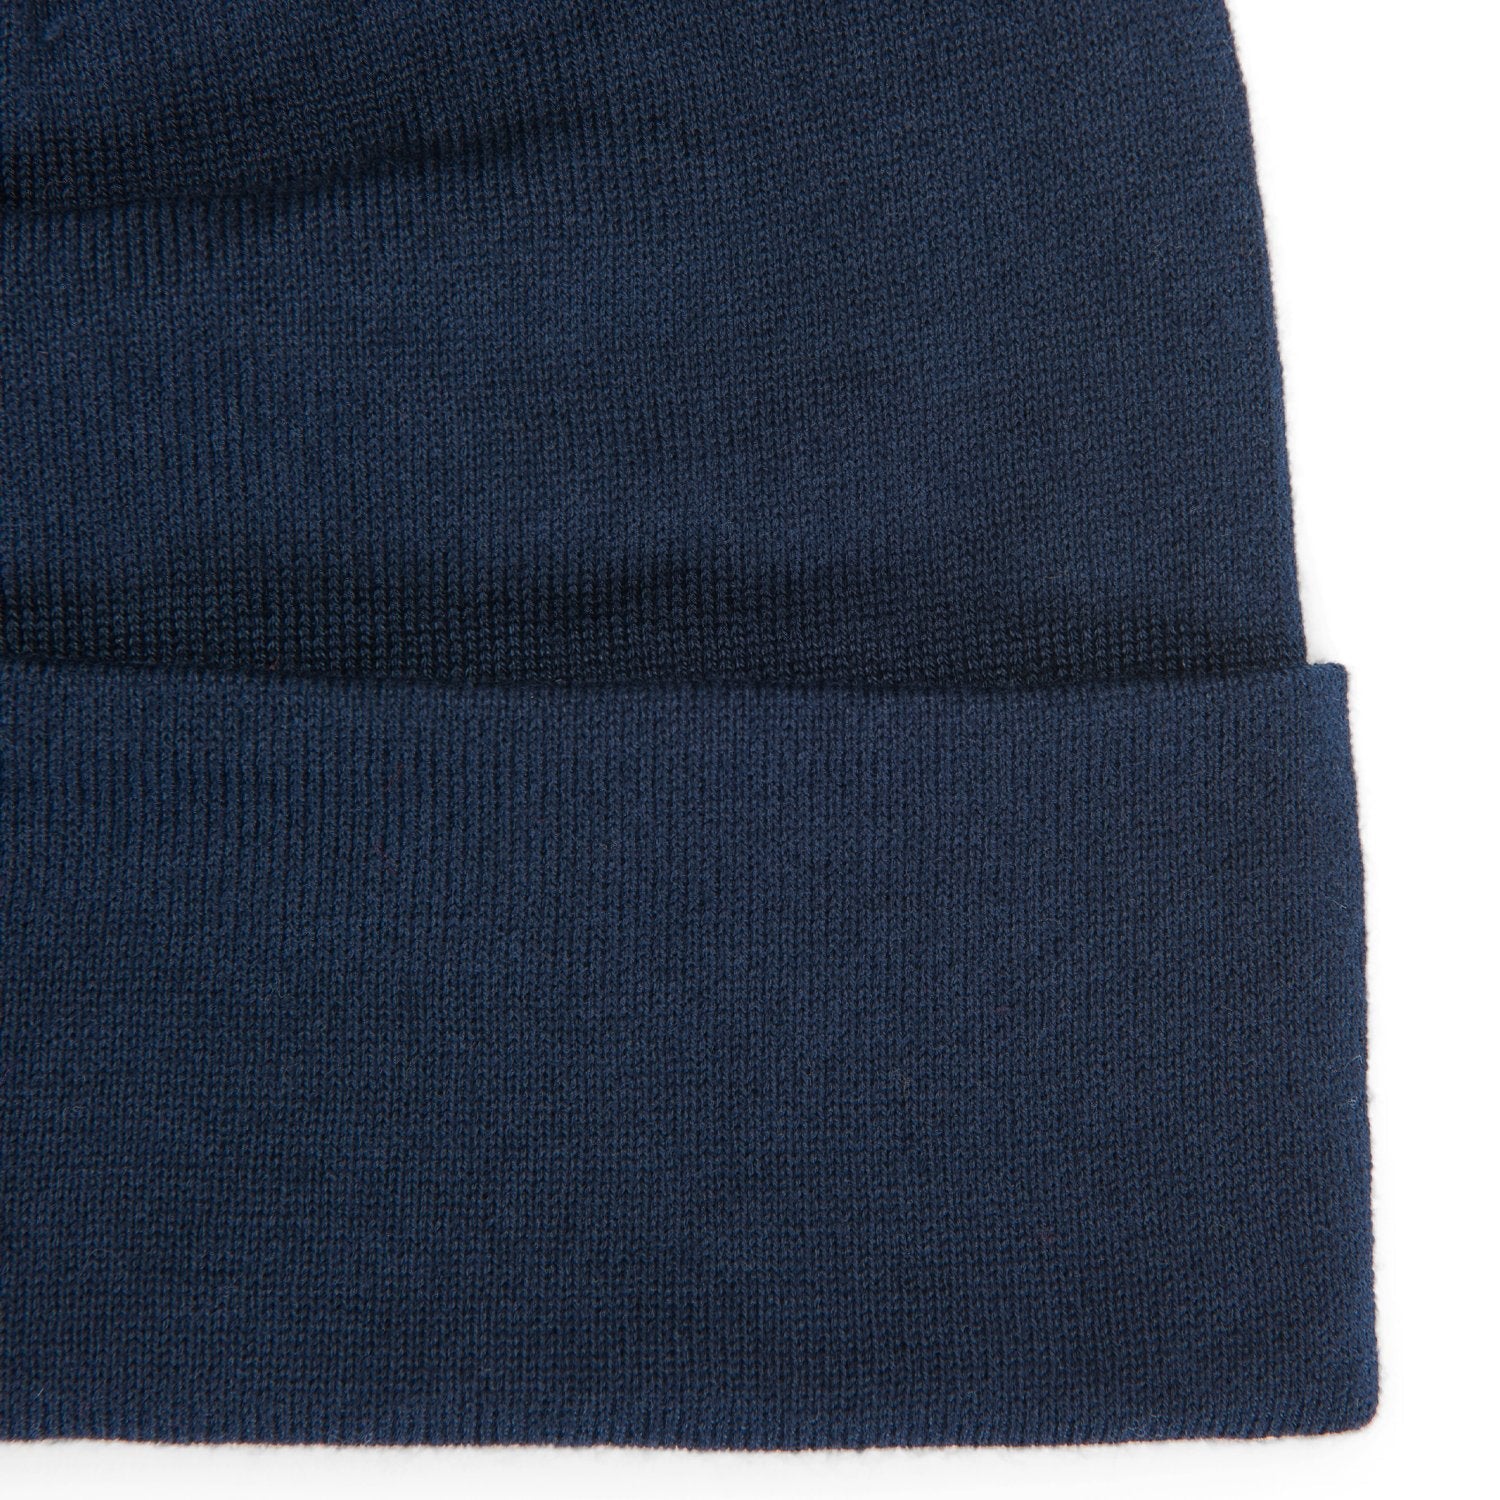 Thermax® Cap II, 100% Polyester - Navy II brim perspective - made in The USA Wigwam Socks